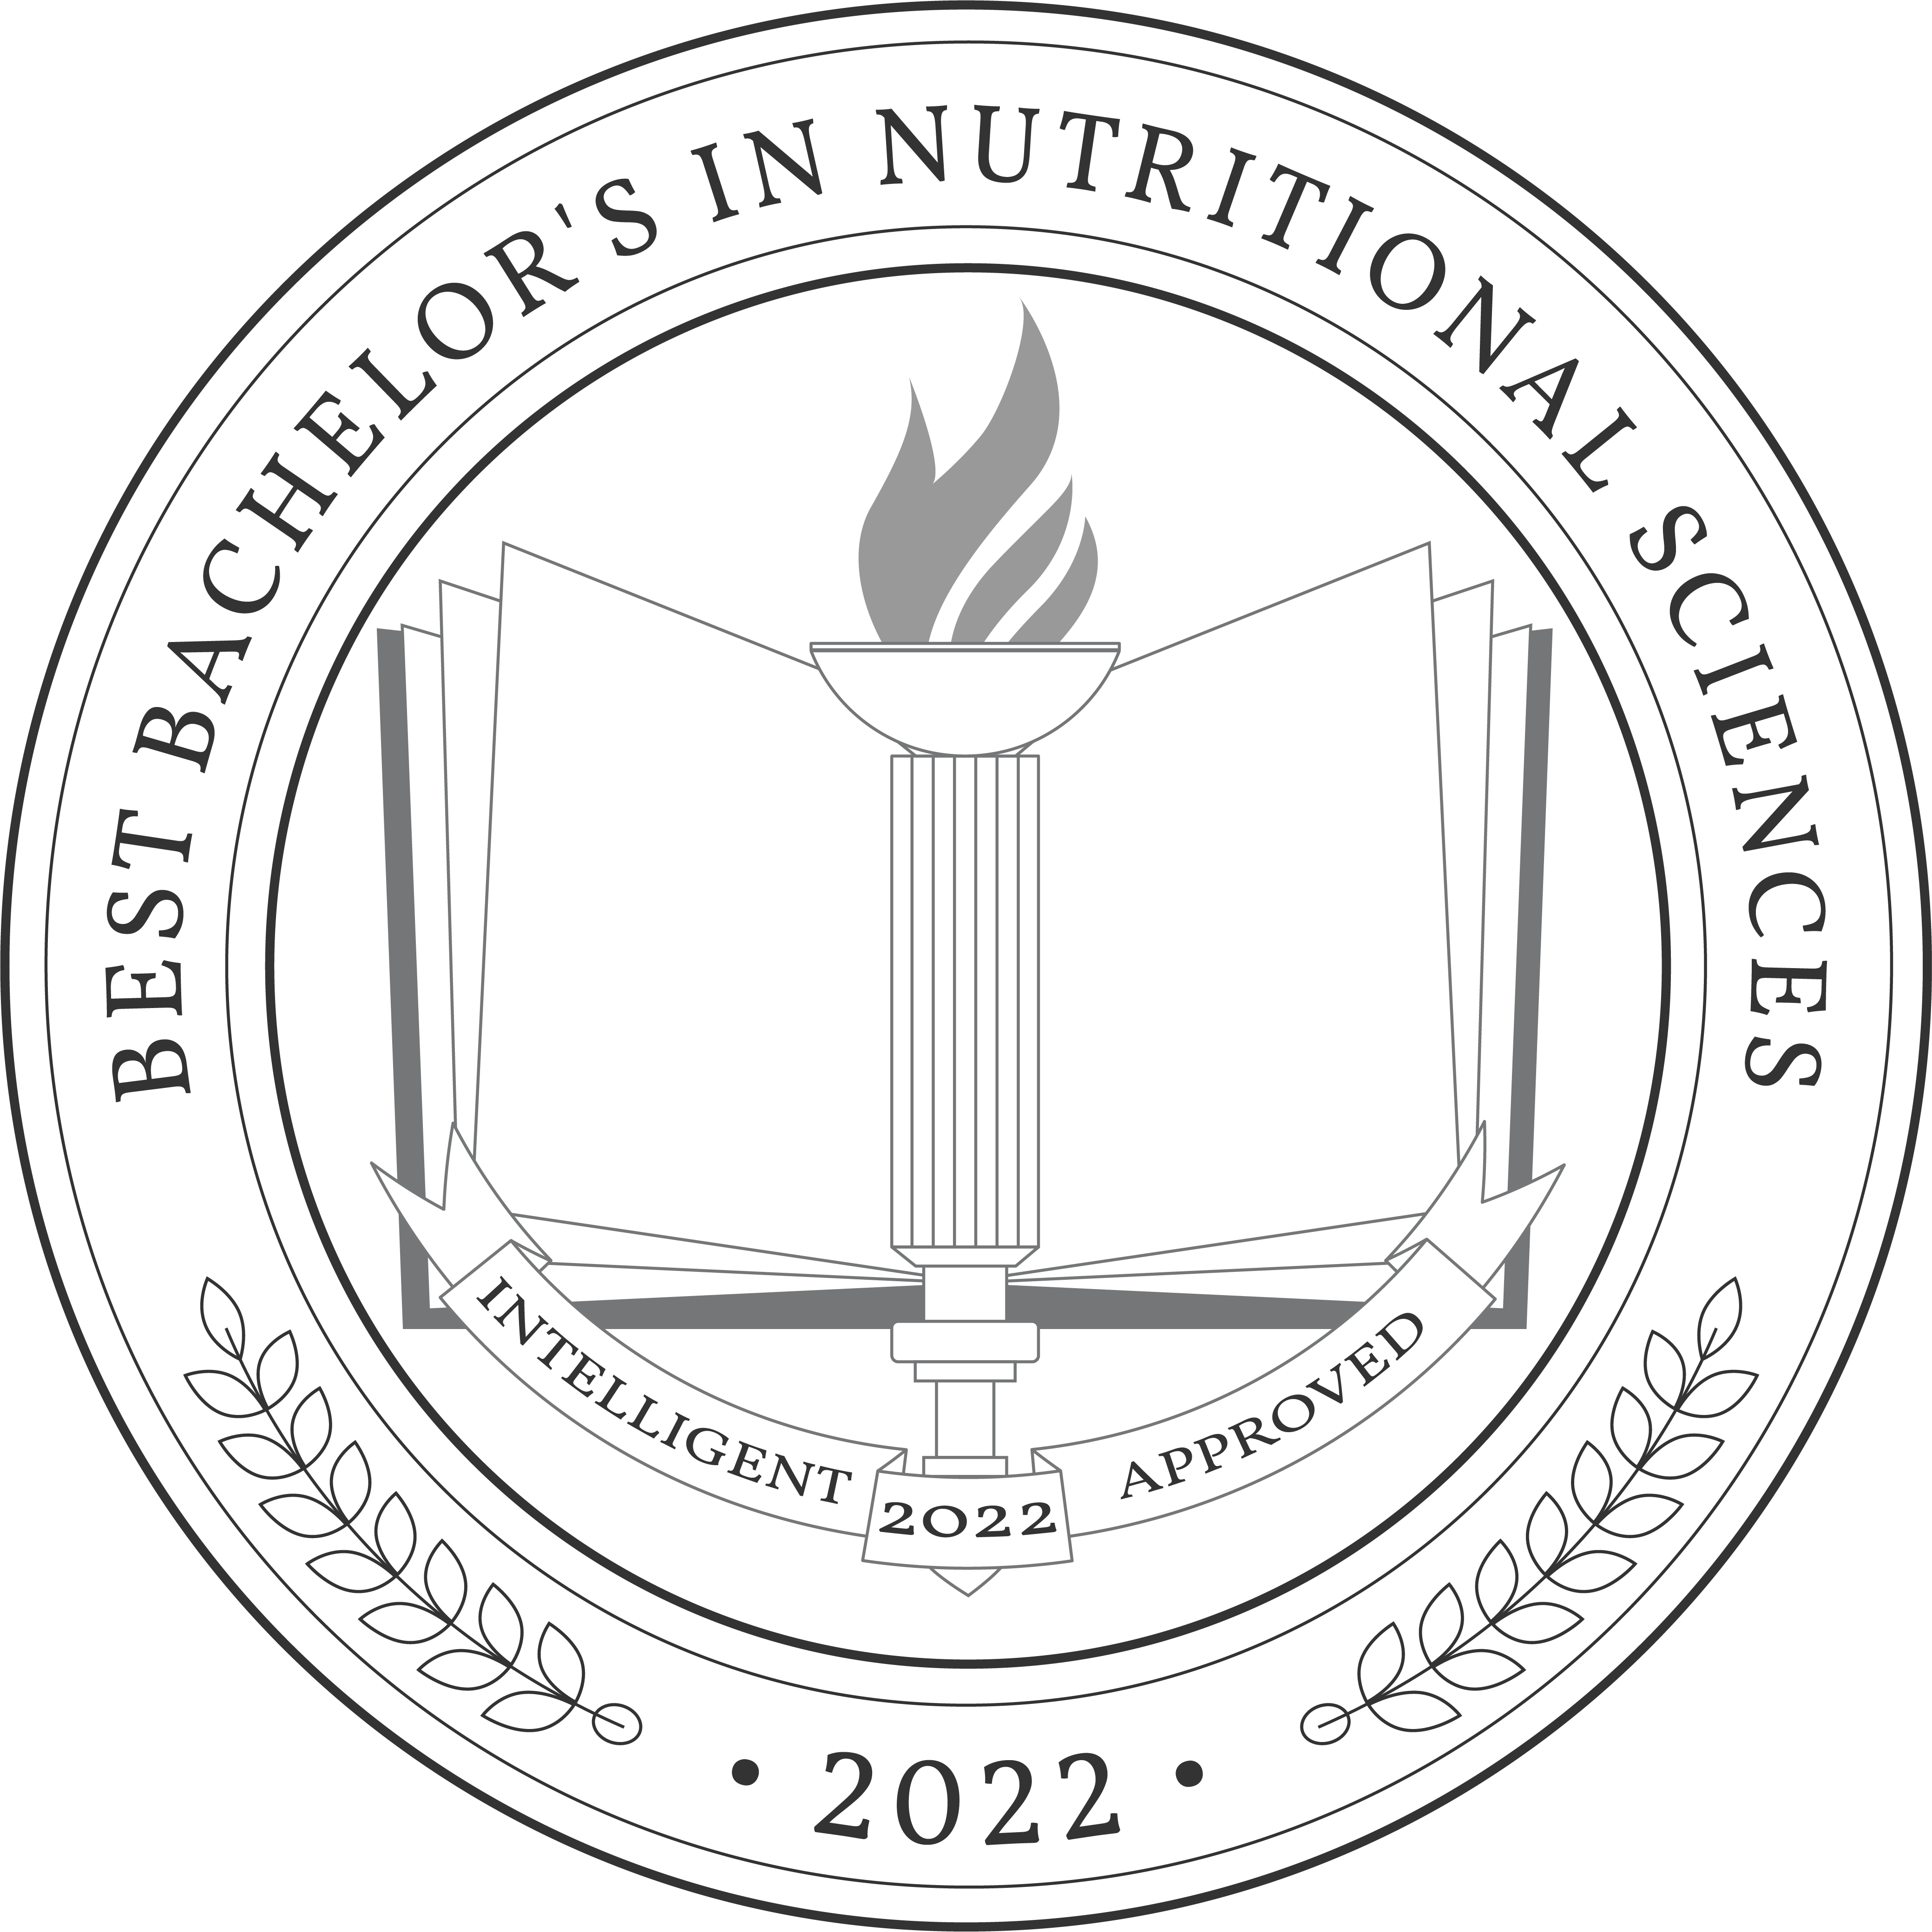 Best-Bachelors-in-Nutritional-Sciences-Badge.png